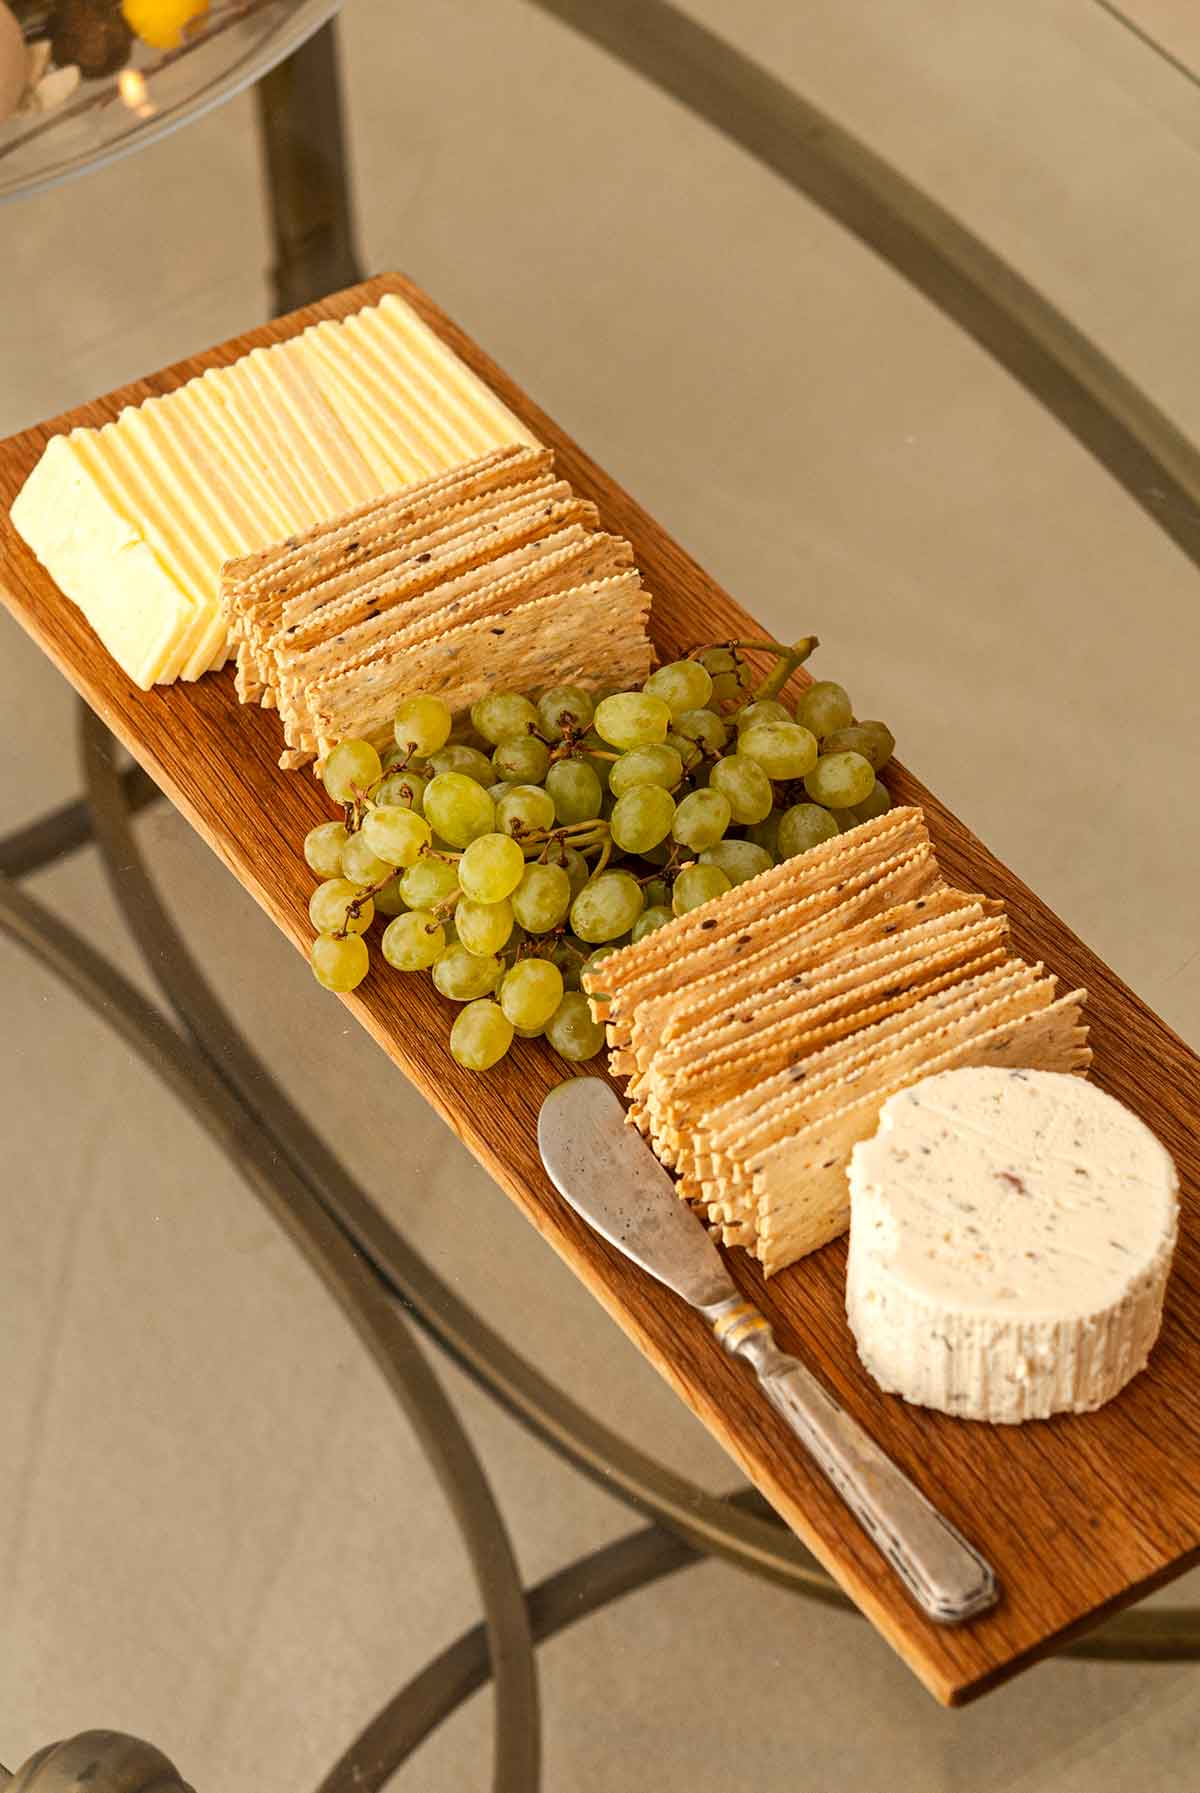 A board with 2 cheeses, crackers and small grapes on a glass table.